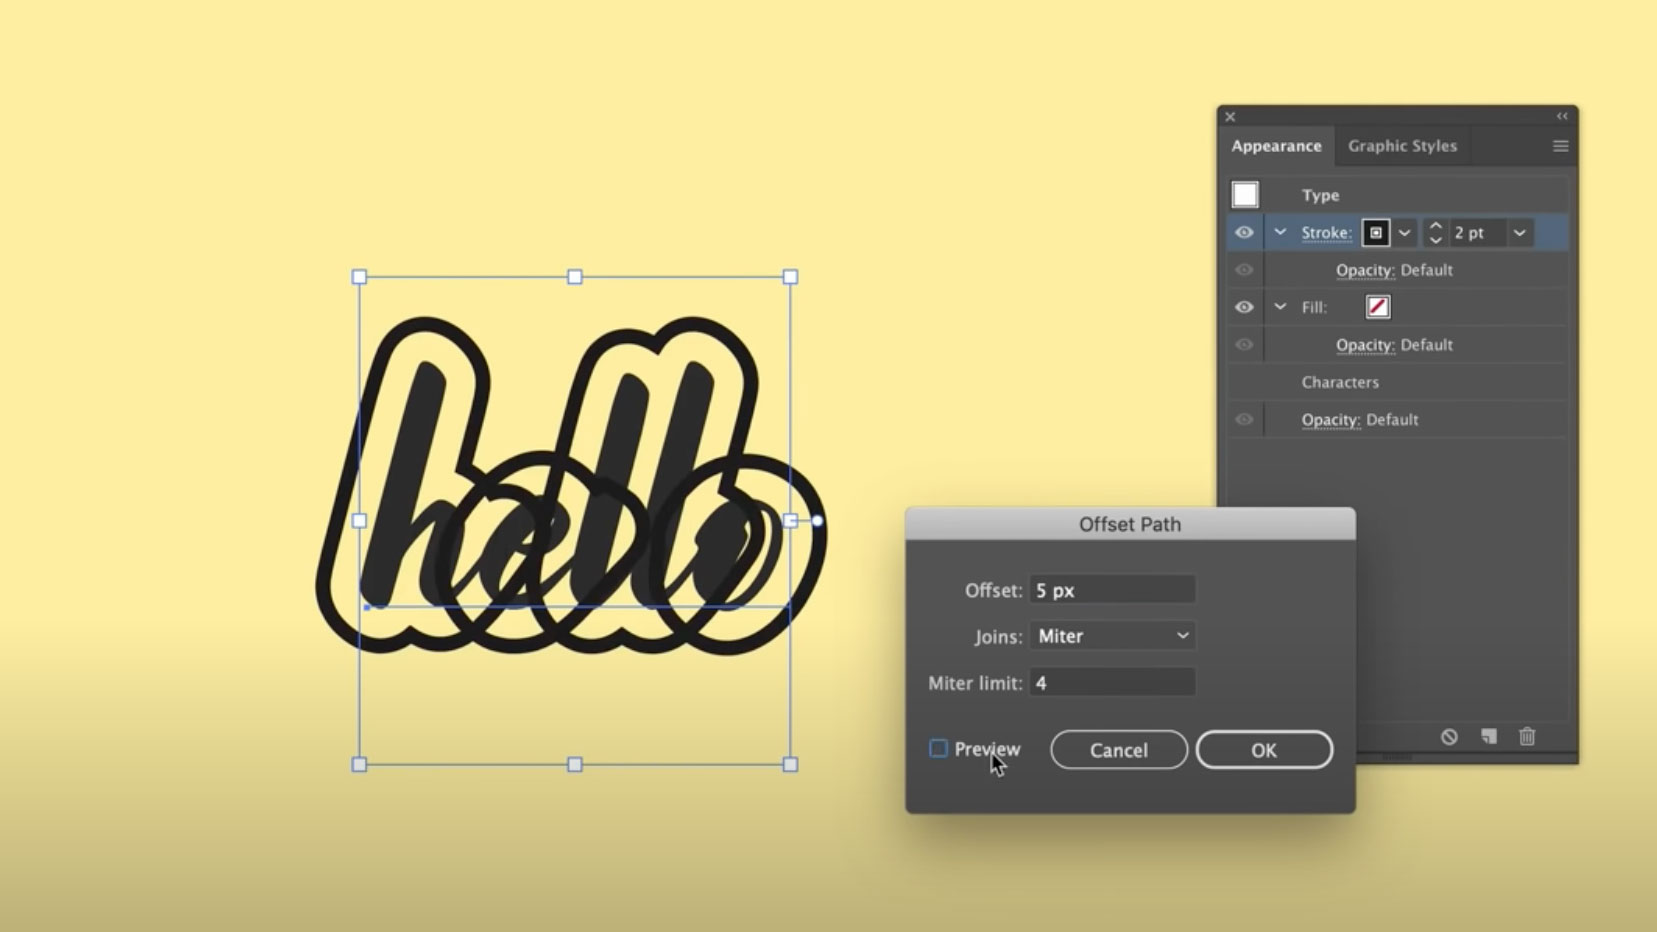 This must-see video shares 10 hidden tips for Adobe Illustrator